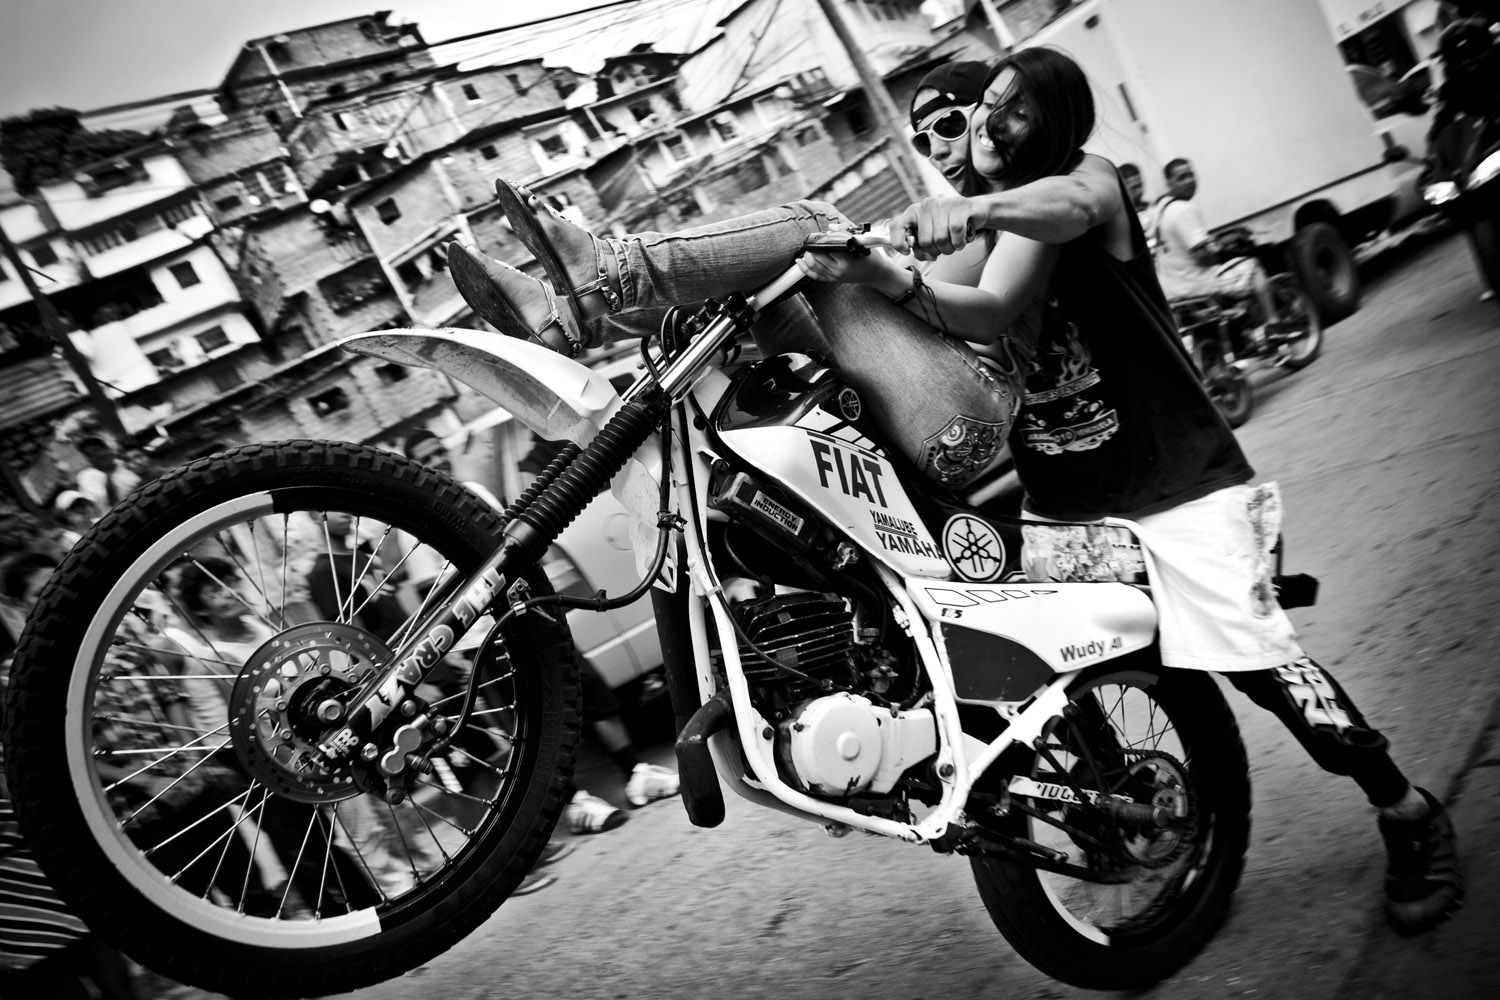 image: Motorcycle stunts in Caracas. Motorcycle, like cellphones, are some of the most coveted objects in the city, and the source of a number of conflicts in the city.